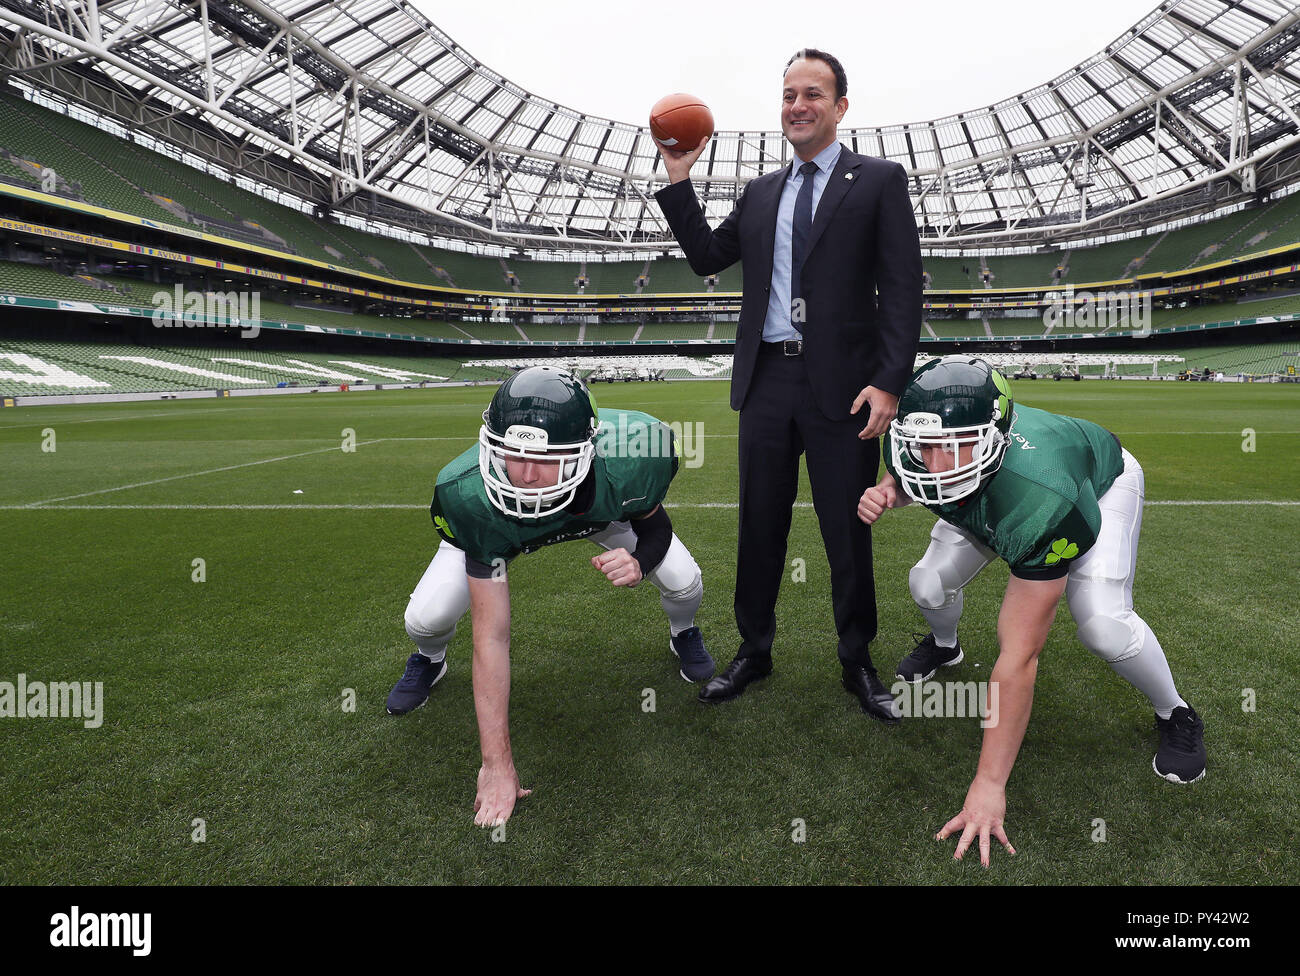 An Taoiseach Leo Varadkar with players from Cork Admirals American football team Cillian McGillycuddy (left) and Aidan Waters, at the Aviva stadium, Dublin, for the announcement of plans for a five-game American college football series. Stock Photo